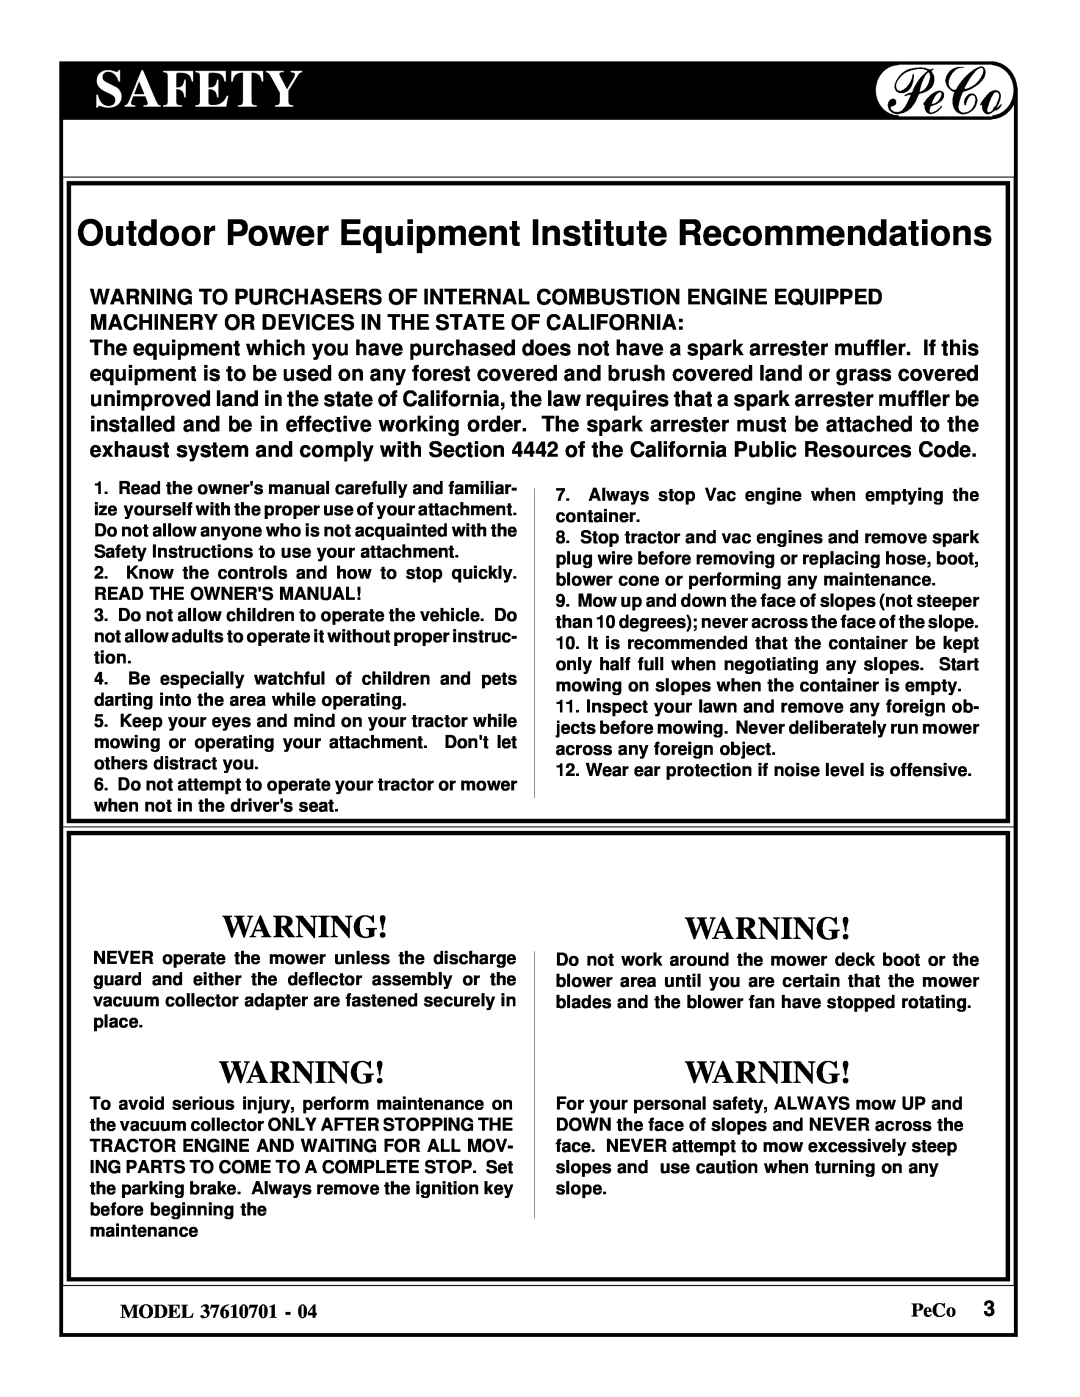 Briggs & Stratton 37610701 - 04 owner manual Safety, Outdoor Power Equipment Institute Recommendations 